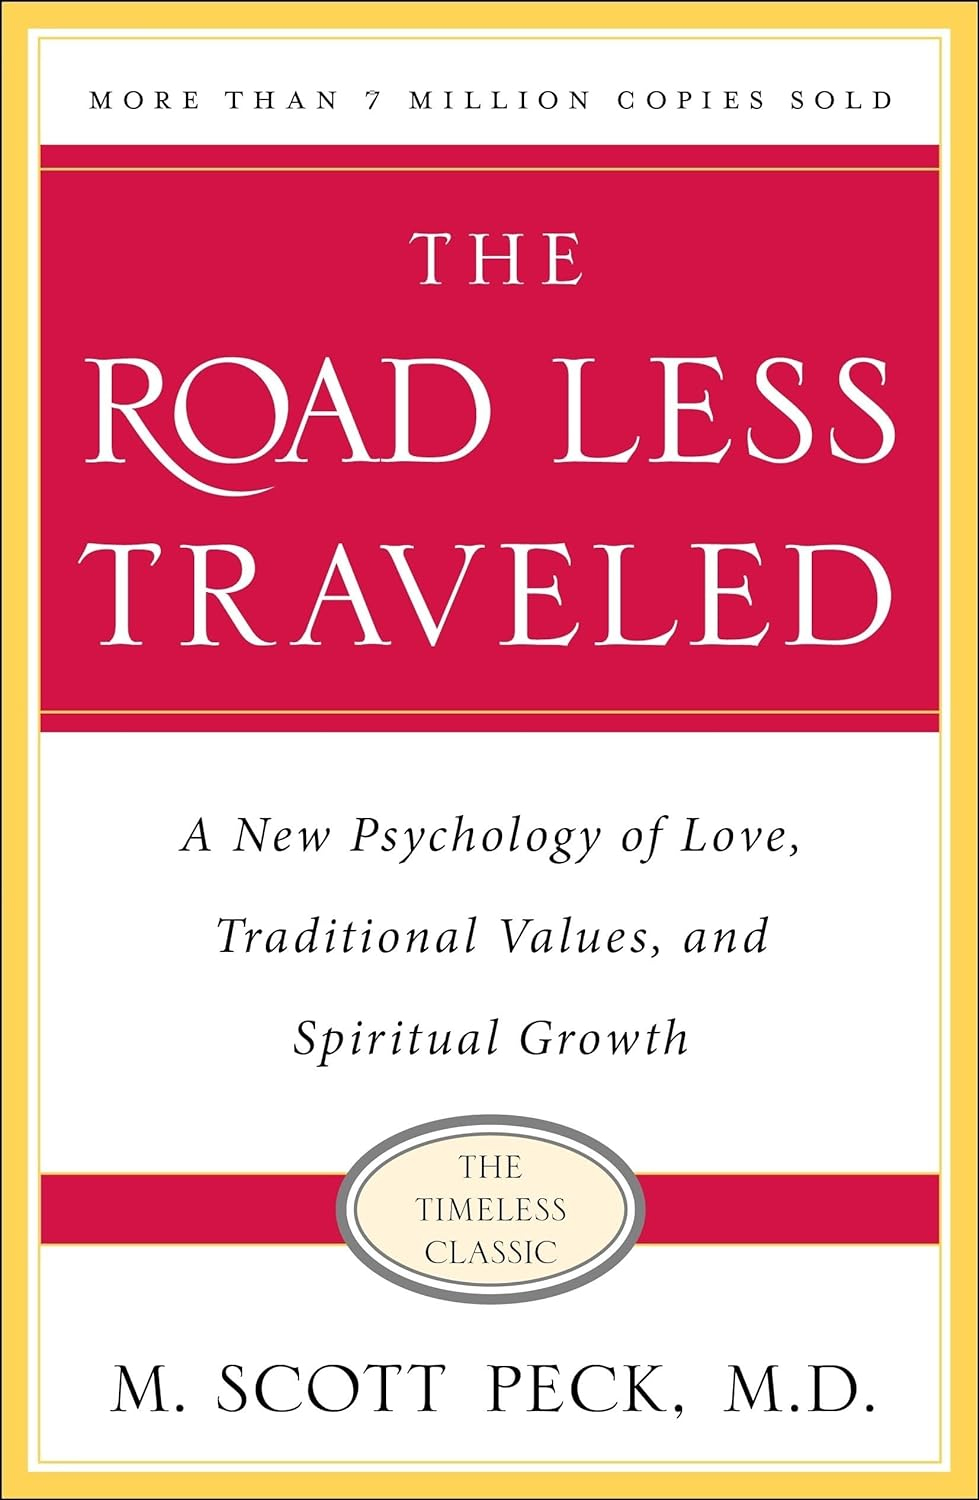 The Road Less Travelled, by M. Scott Peck, M.D.